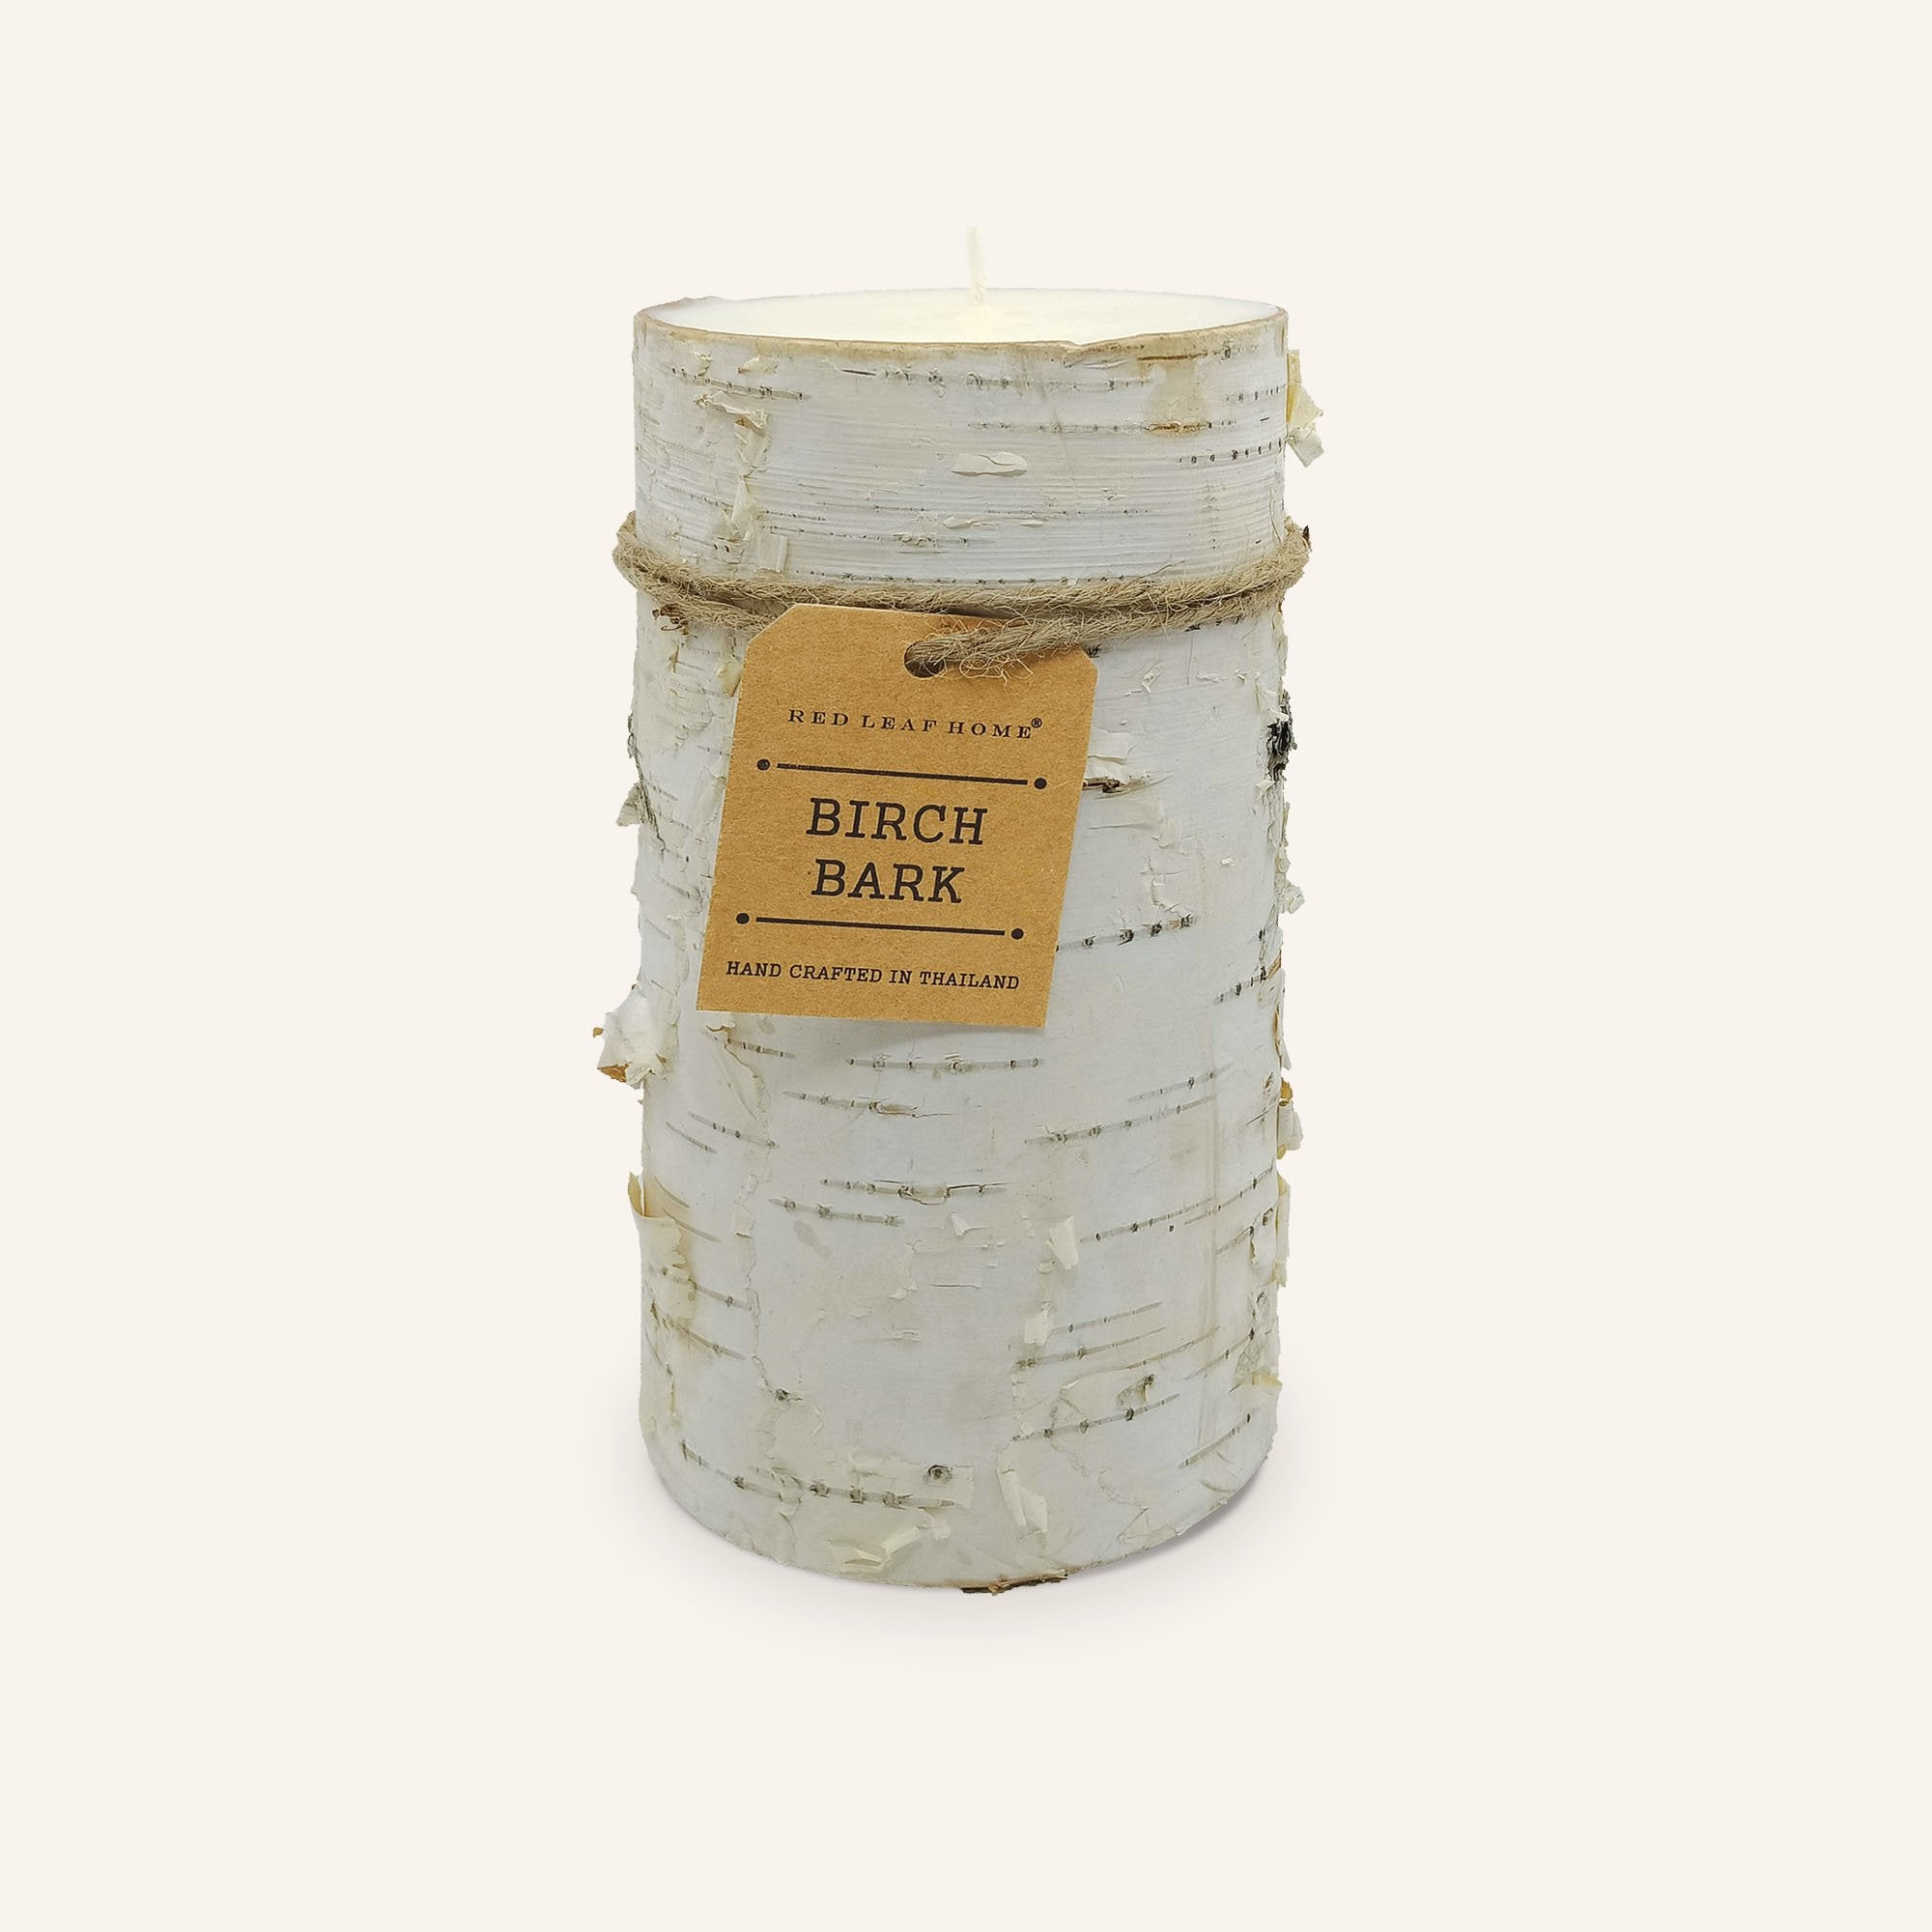 One Birch-bark candle with a brown paper label that reads, "Red Leaf Home. Birch Bark. Hand crafted in Thailand."